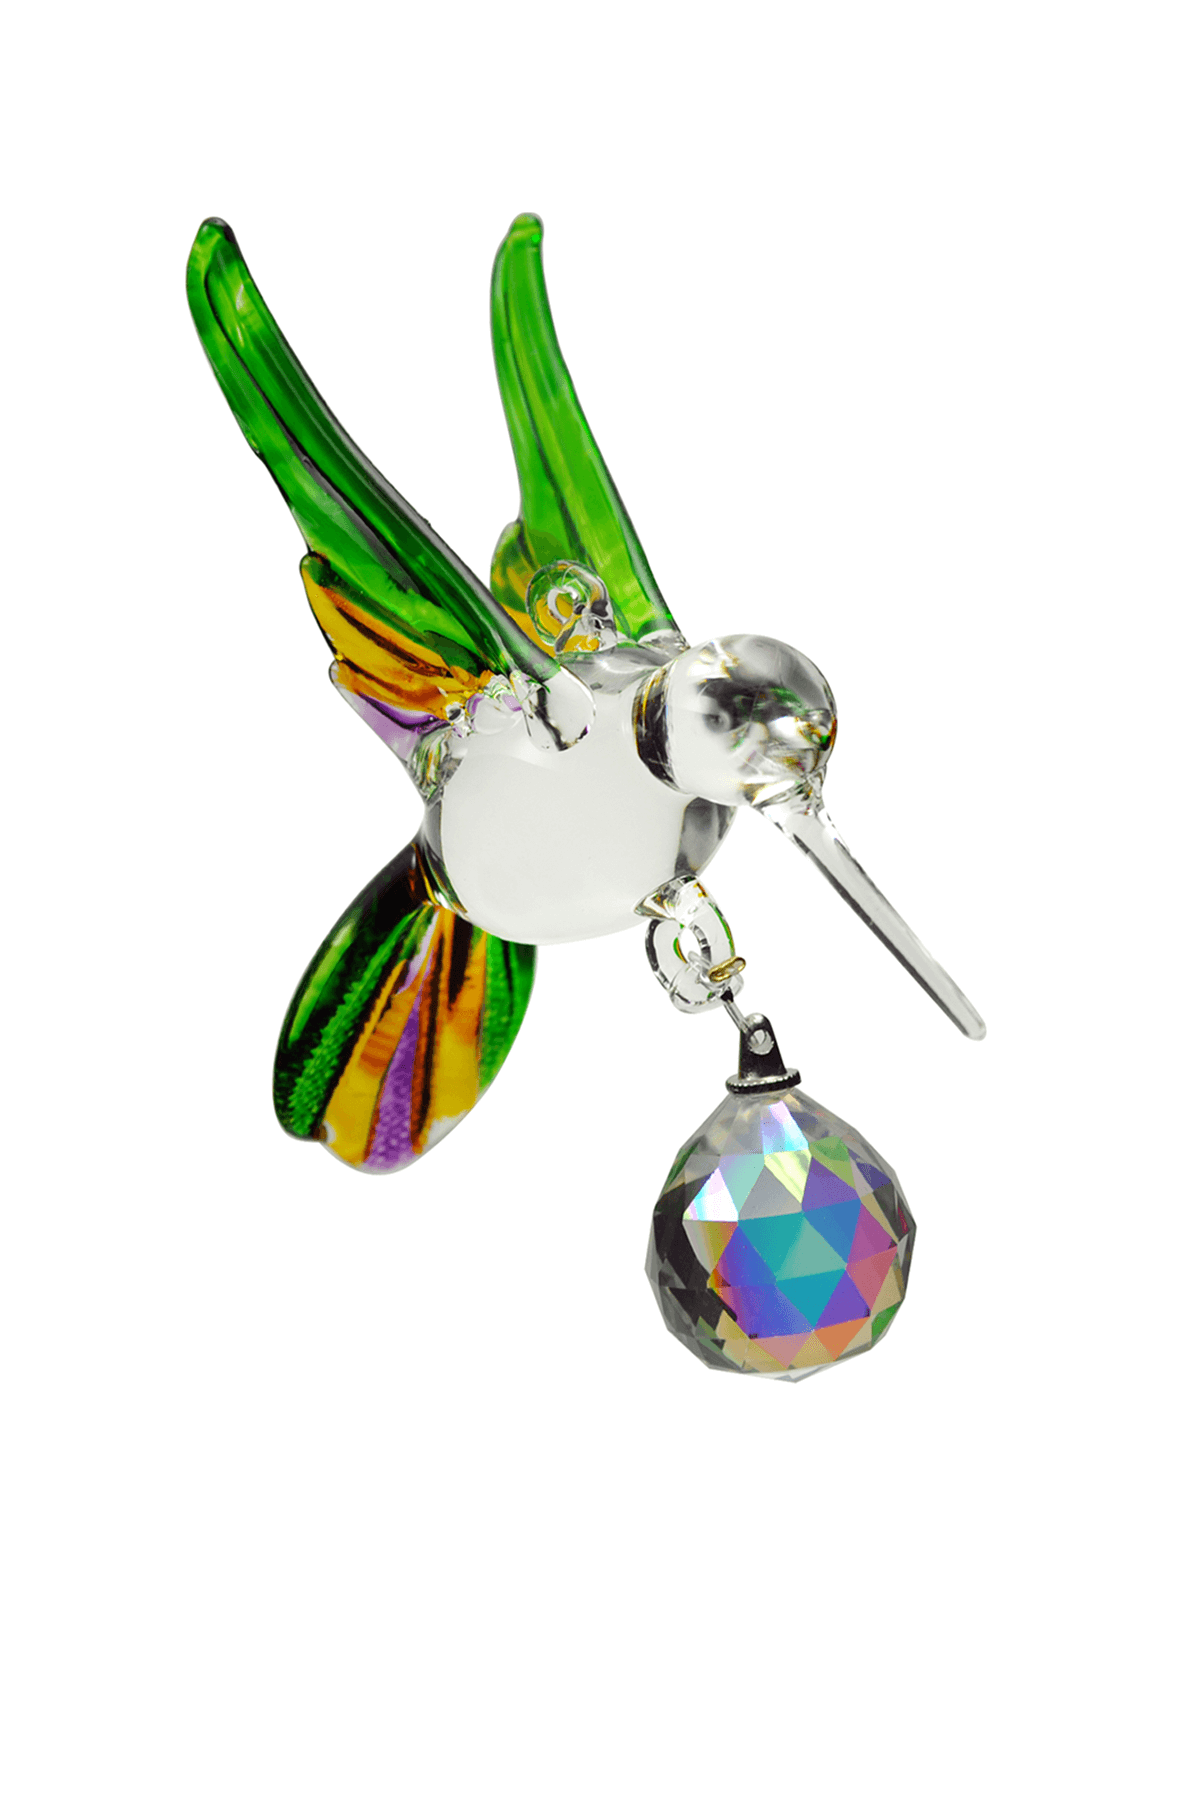 Crystal Castle Glass Multi-Colored Hummingbird ornament in Green with Yellow and Purple accents and a small crystal ball ornament.